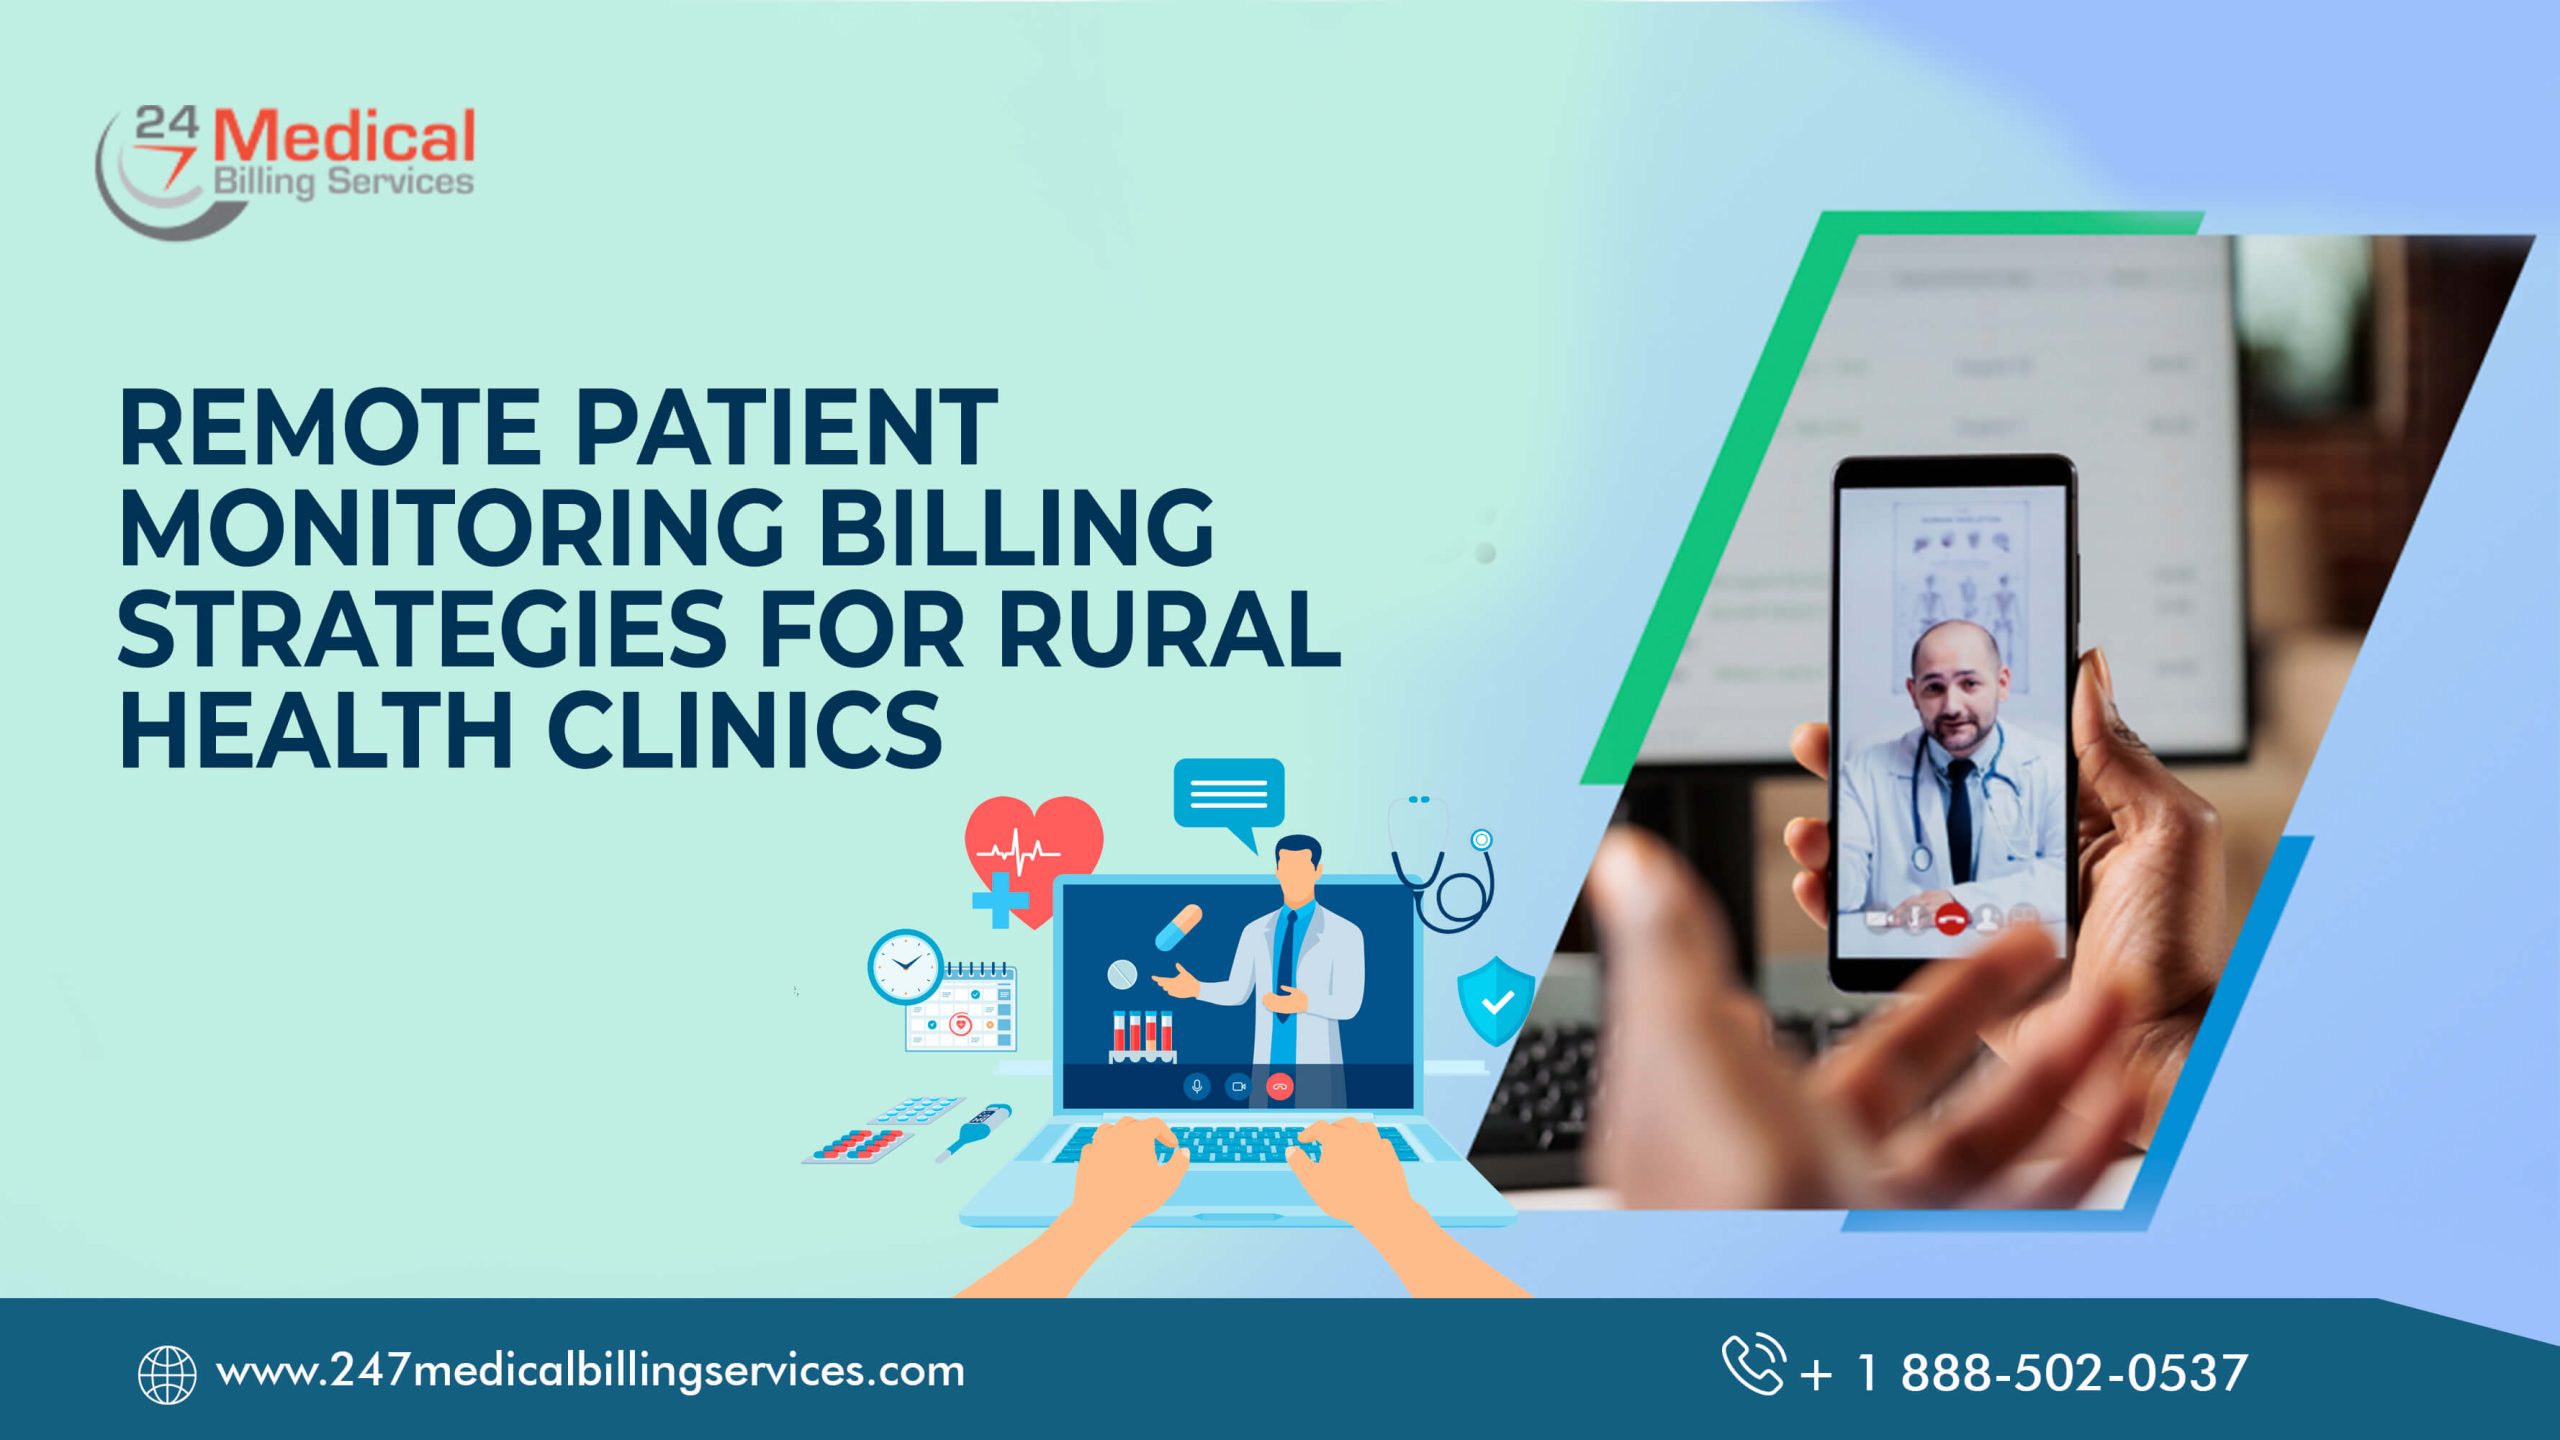  Remote Patient Monitoring Billing Strategies for Rural Health Clinics